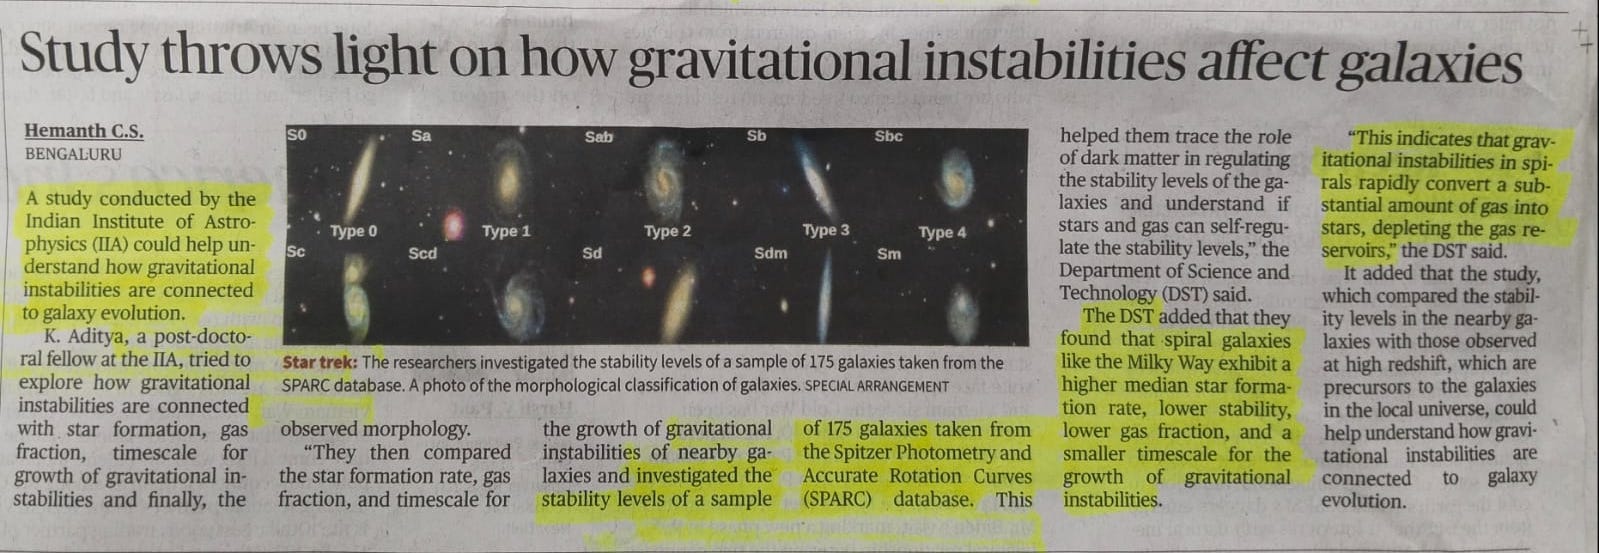 Study throws light on how gravitational instabilities affect galaxies